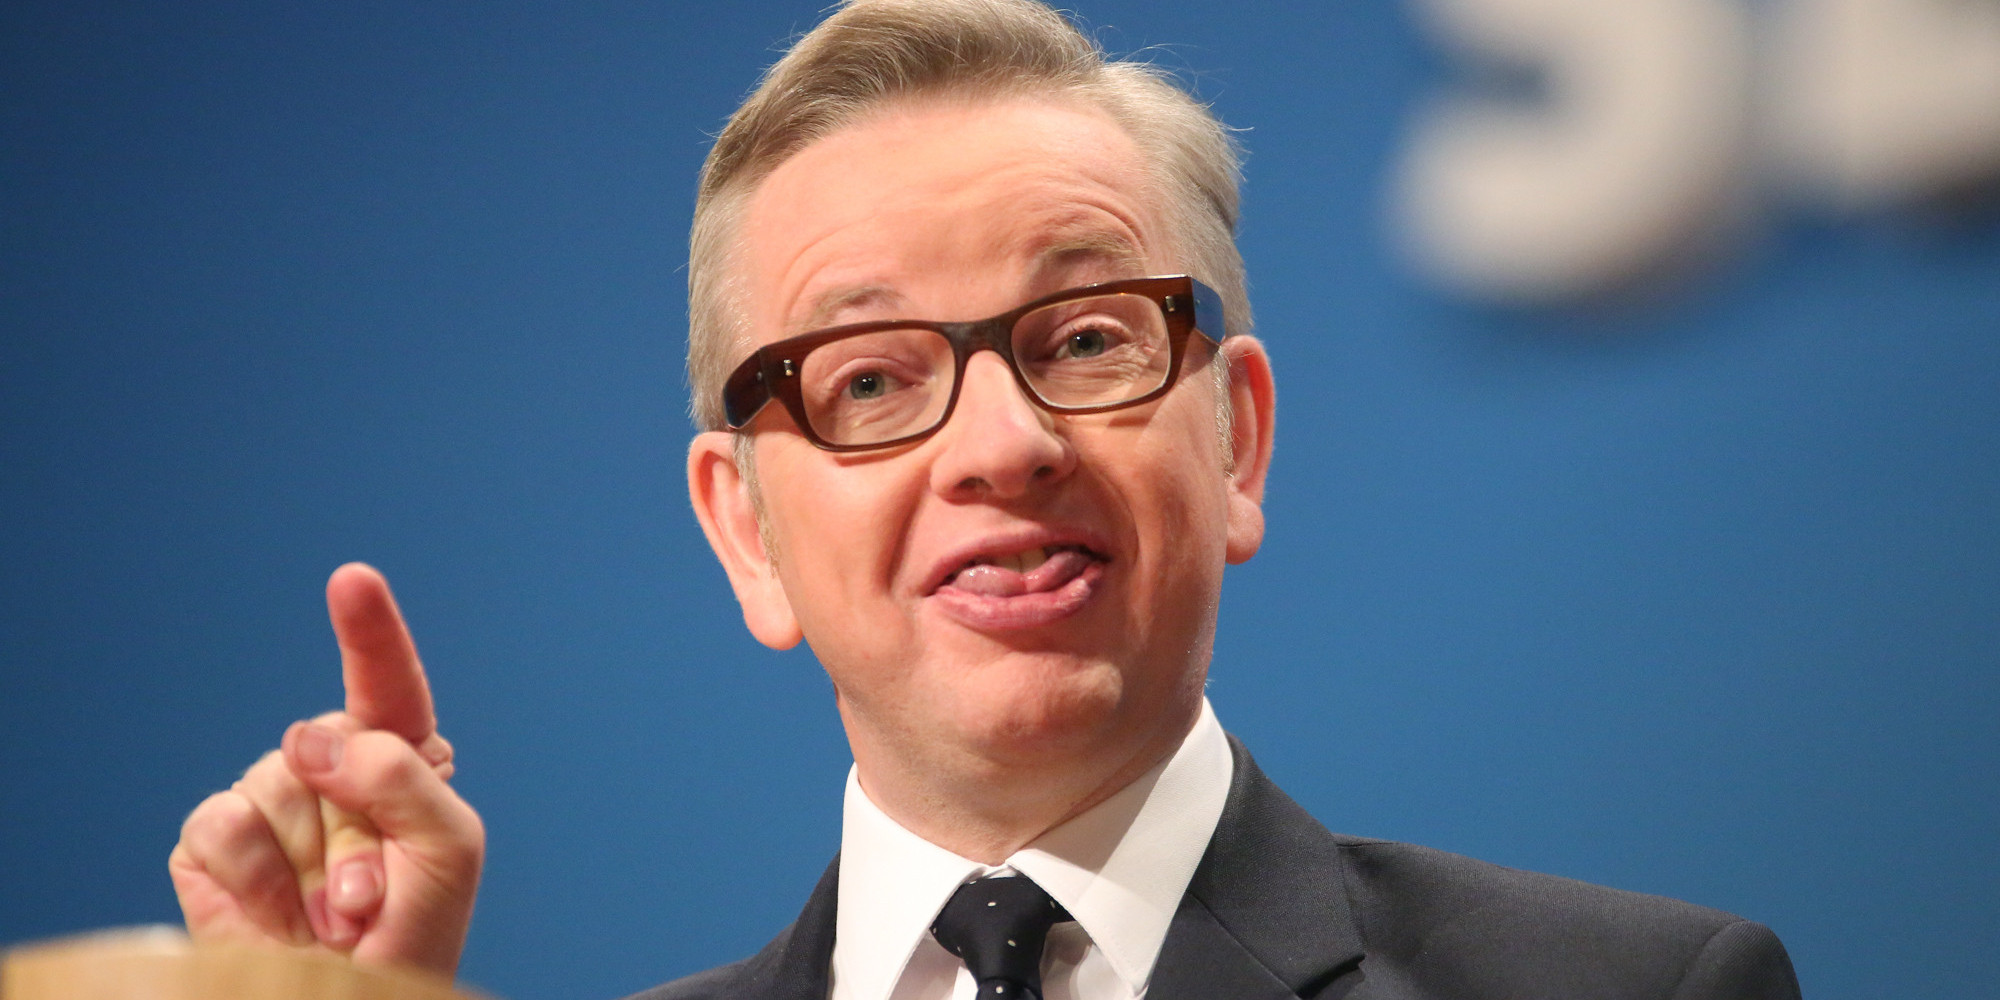 Image result for michael gove